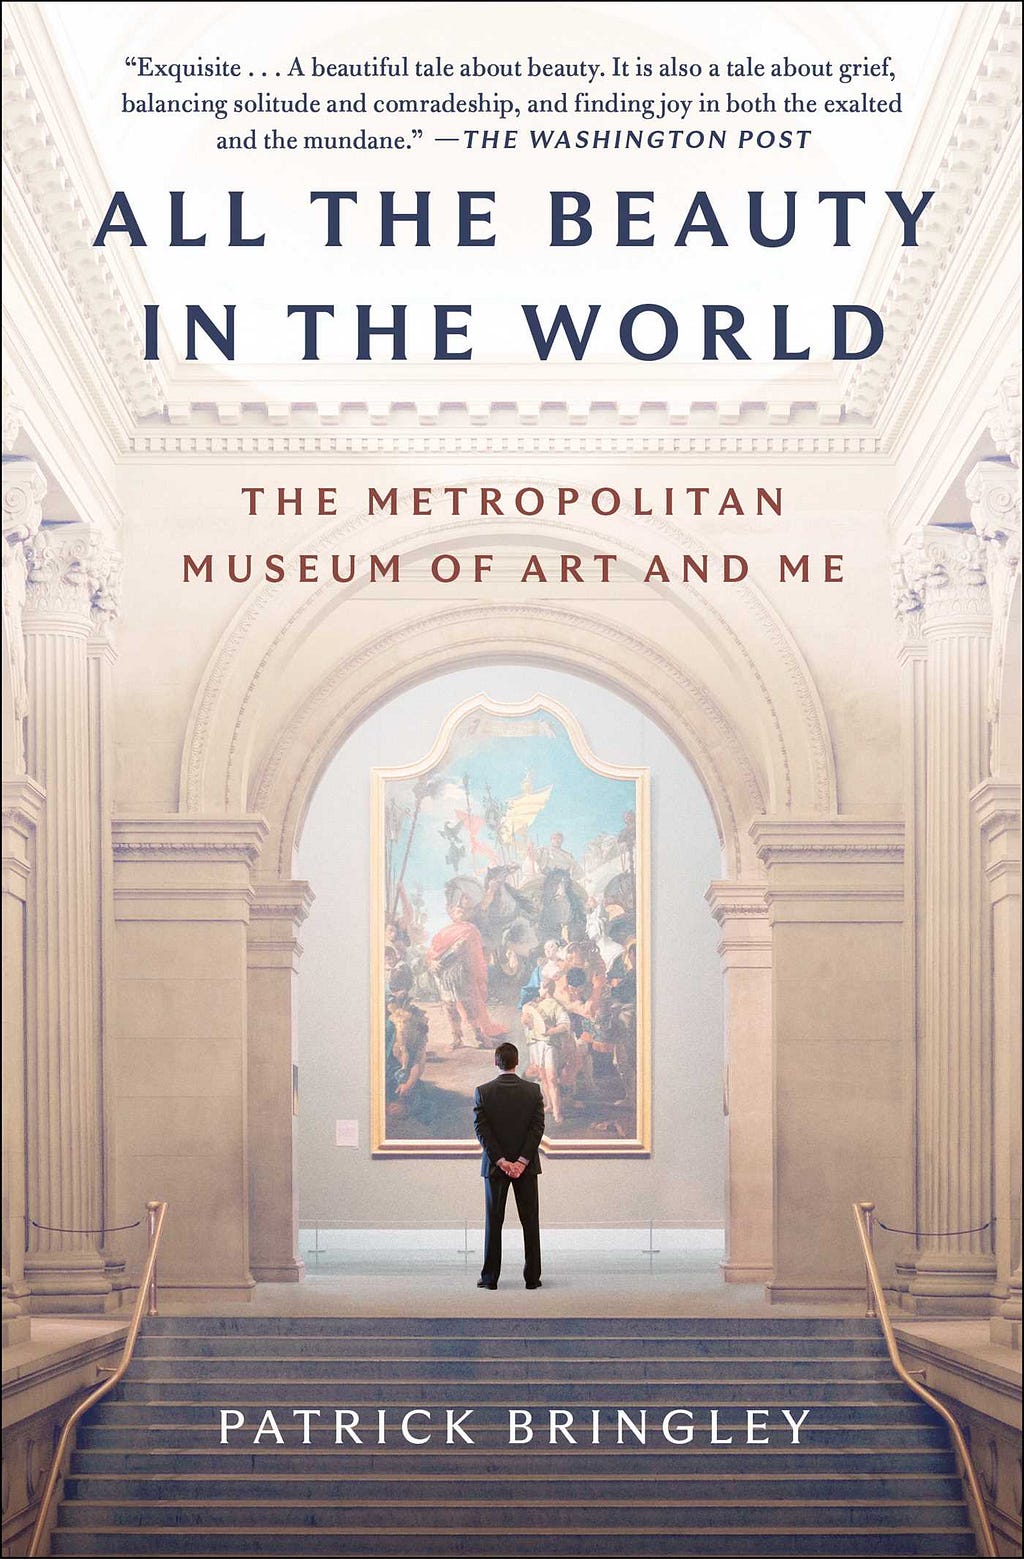 All the Beauty in the World: The Metropolitan Museum of Art and Me E book